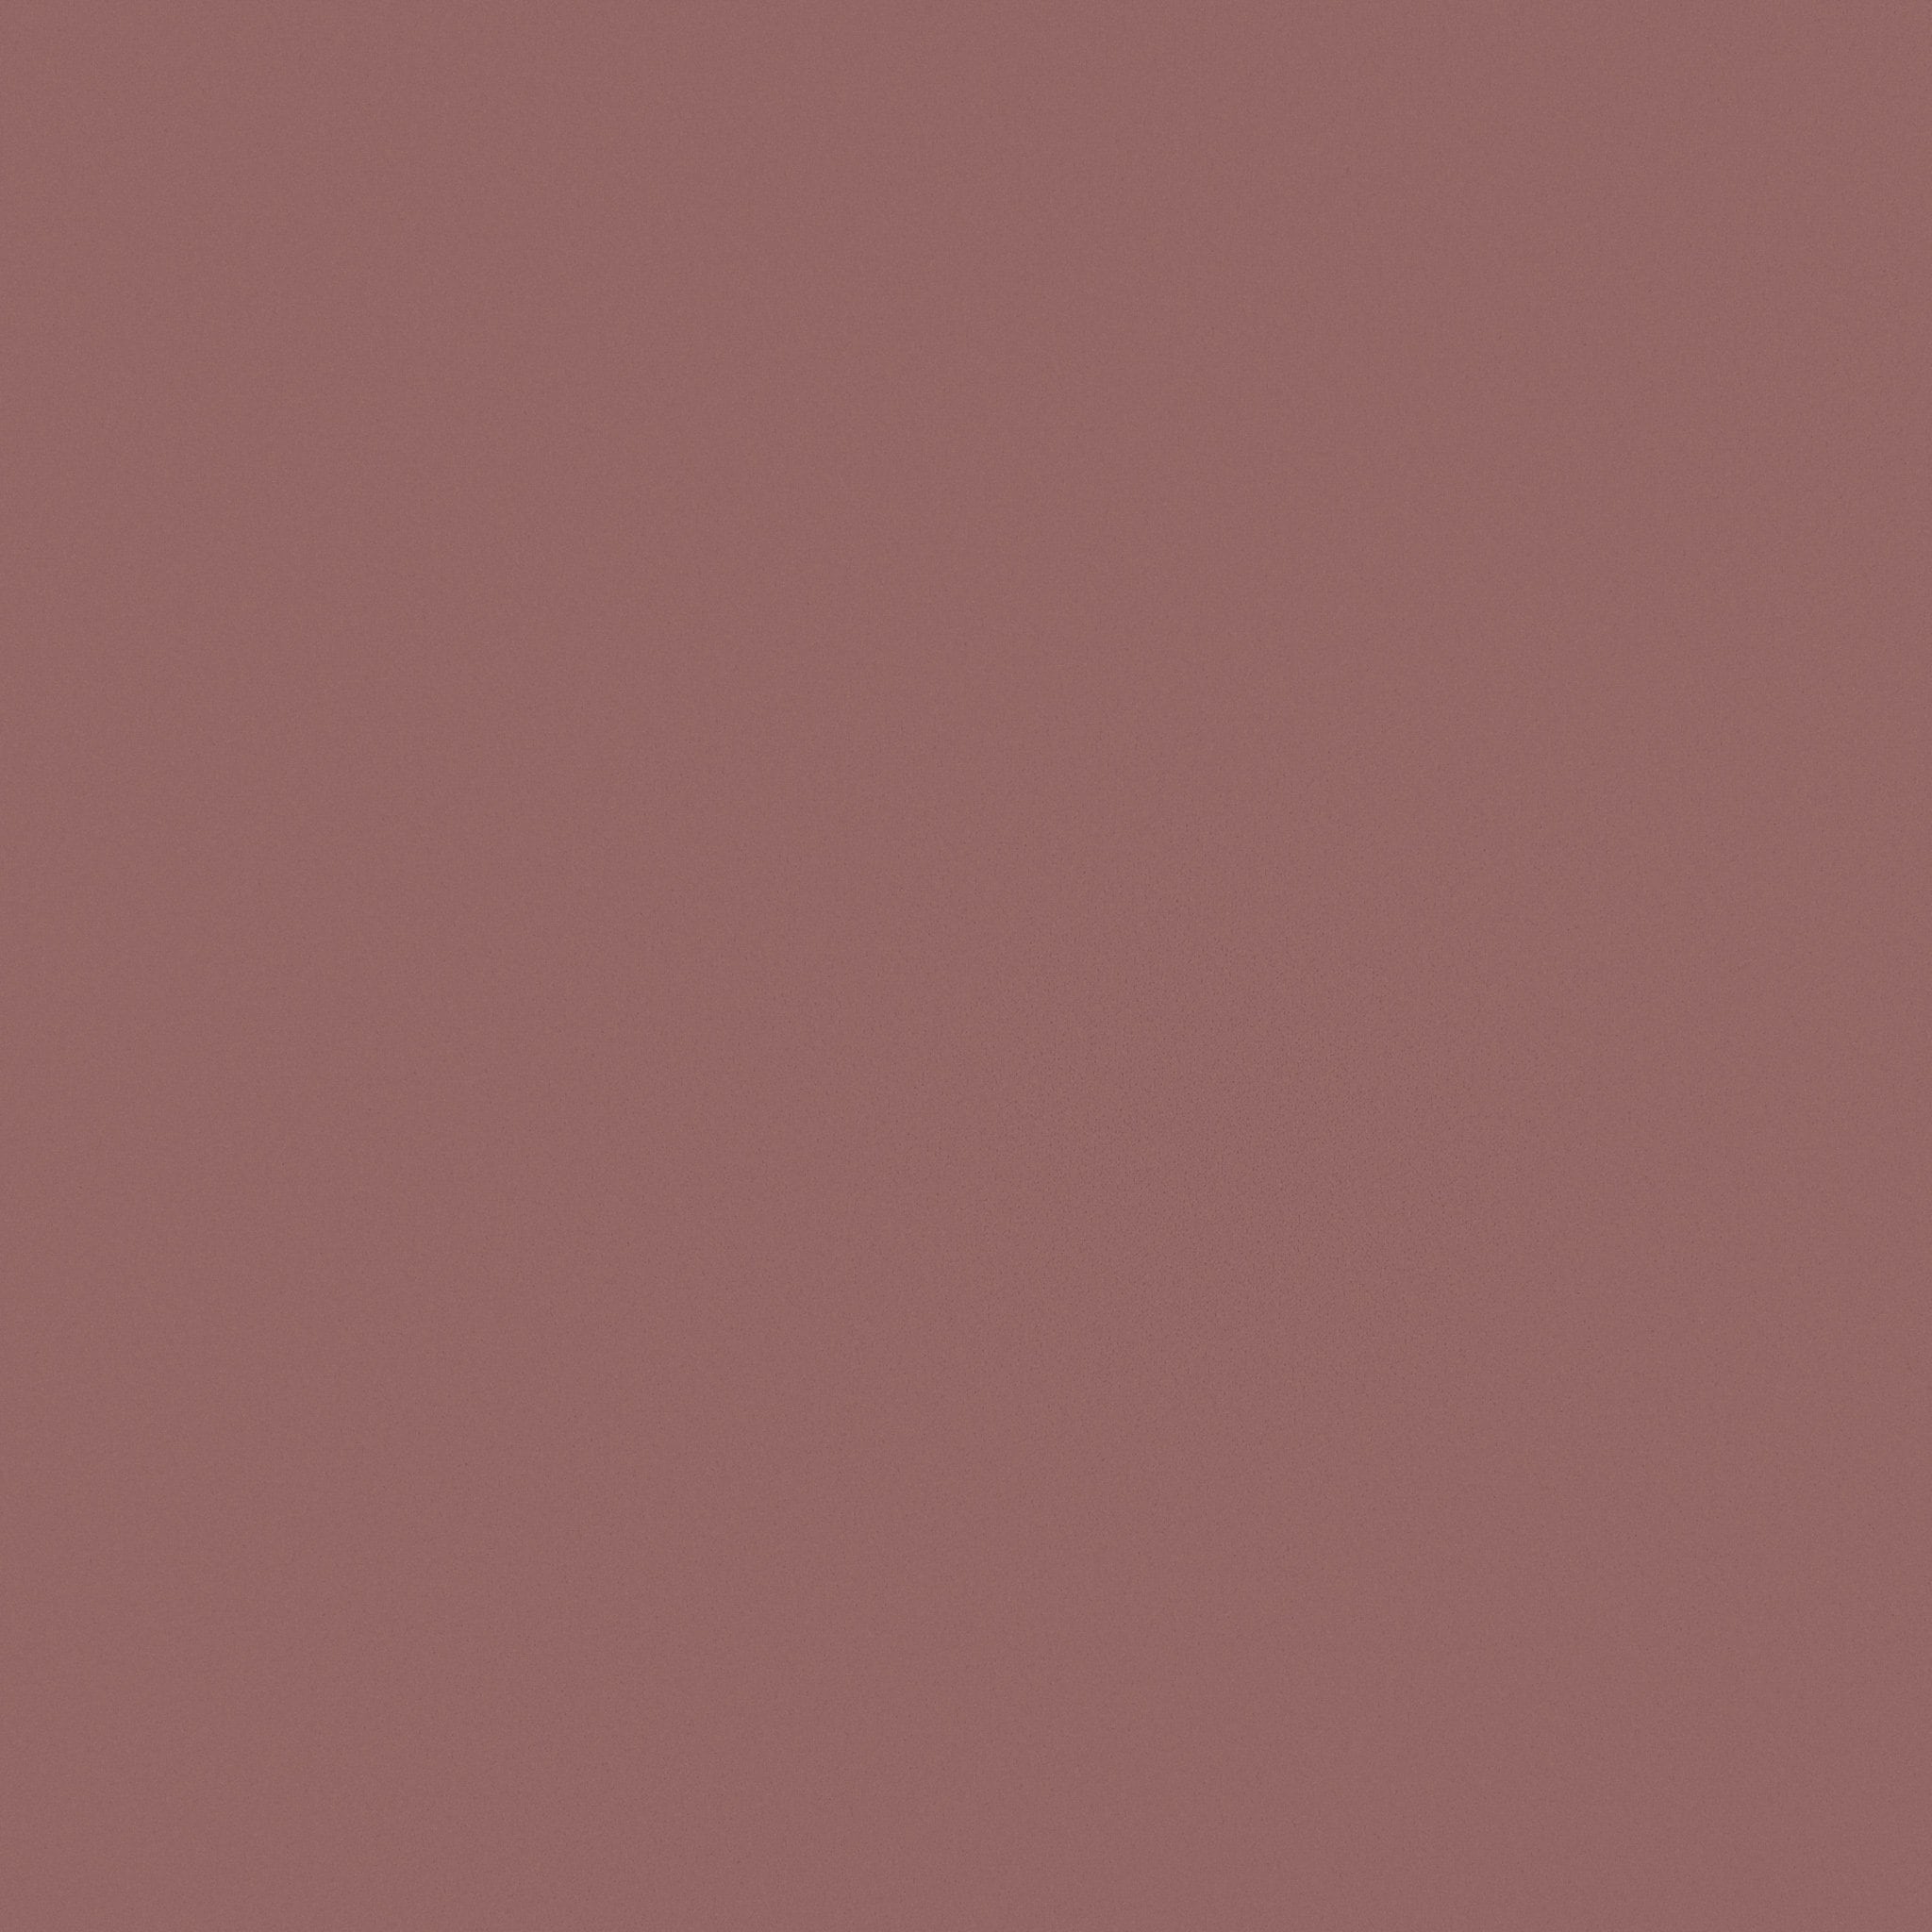 Mauve Solid ITY Heavy Stretch Moss Crepe Fabric-215GSM - 1 Yard Style 782